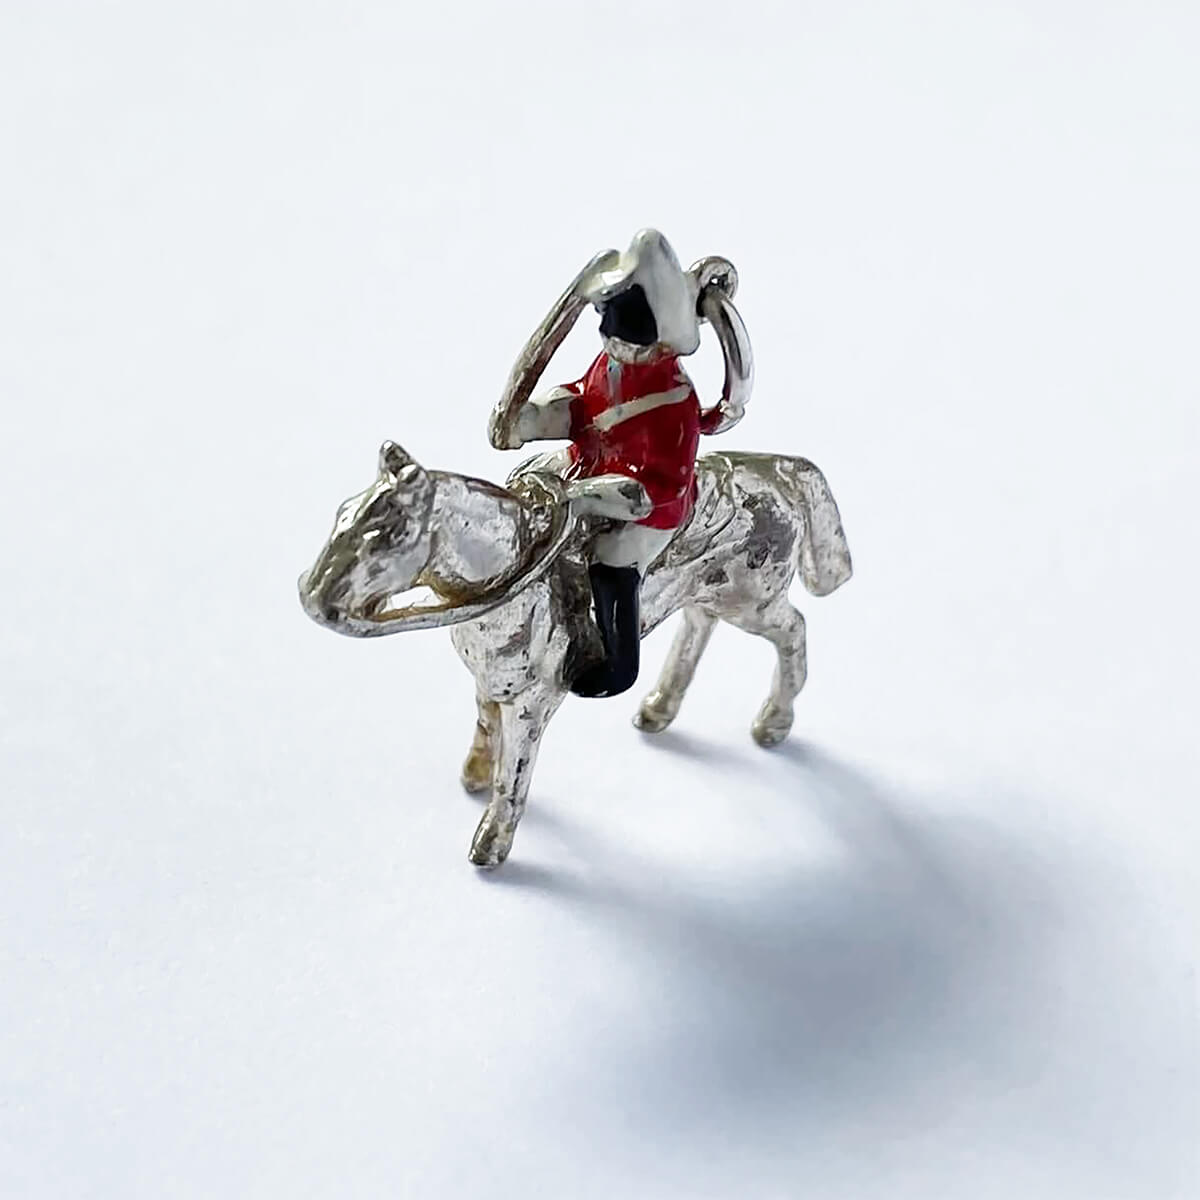 Queen Cavalry soldier on horseback silver enamel vintage English pendant from Charmarama Charms